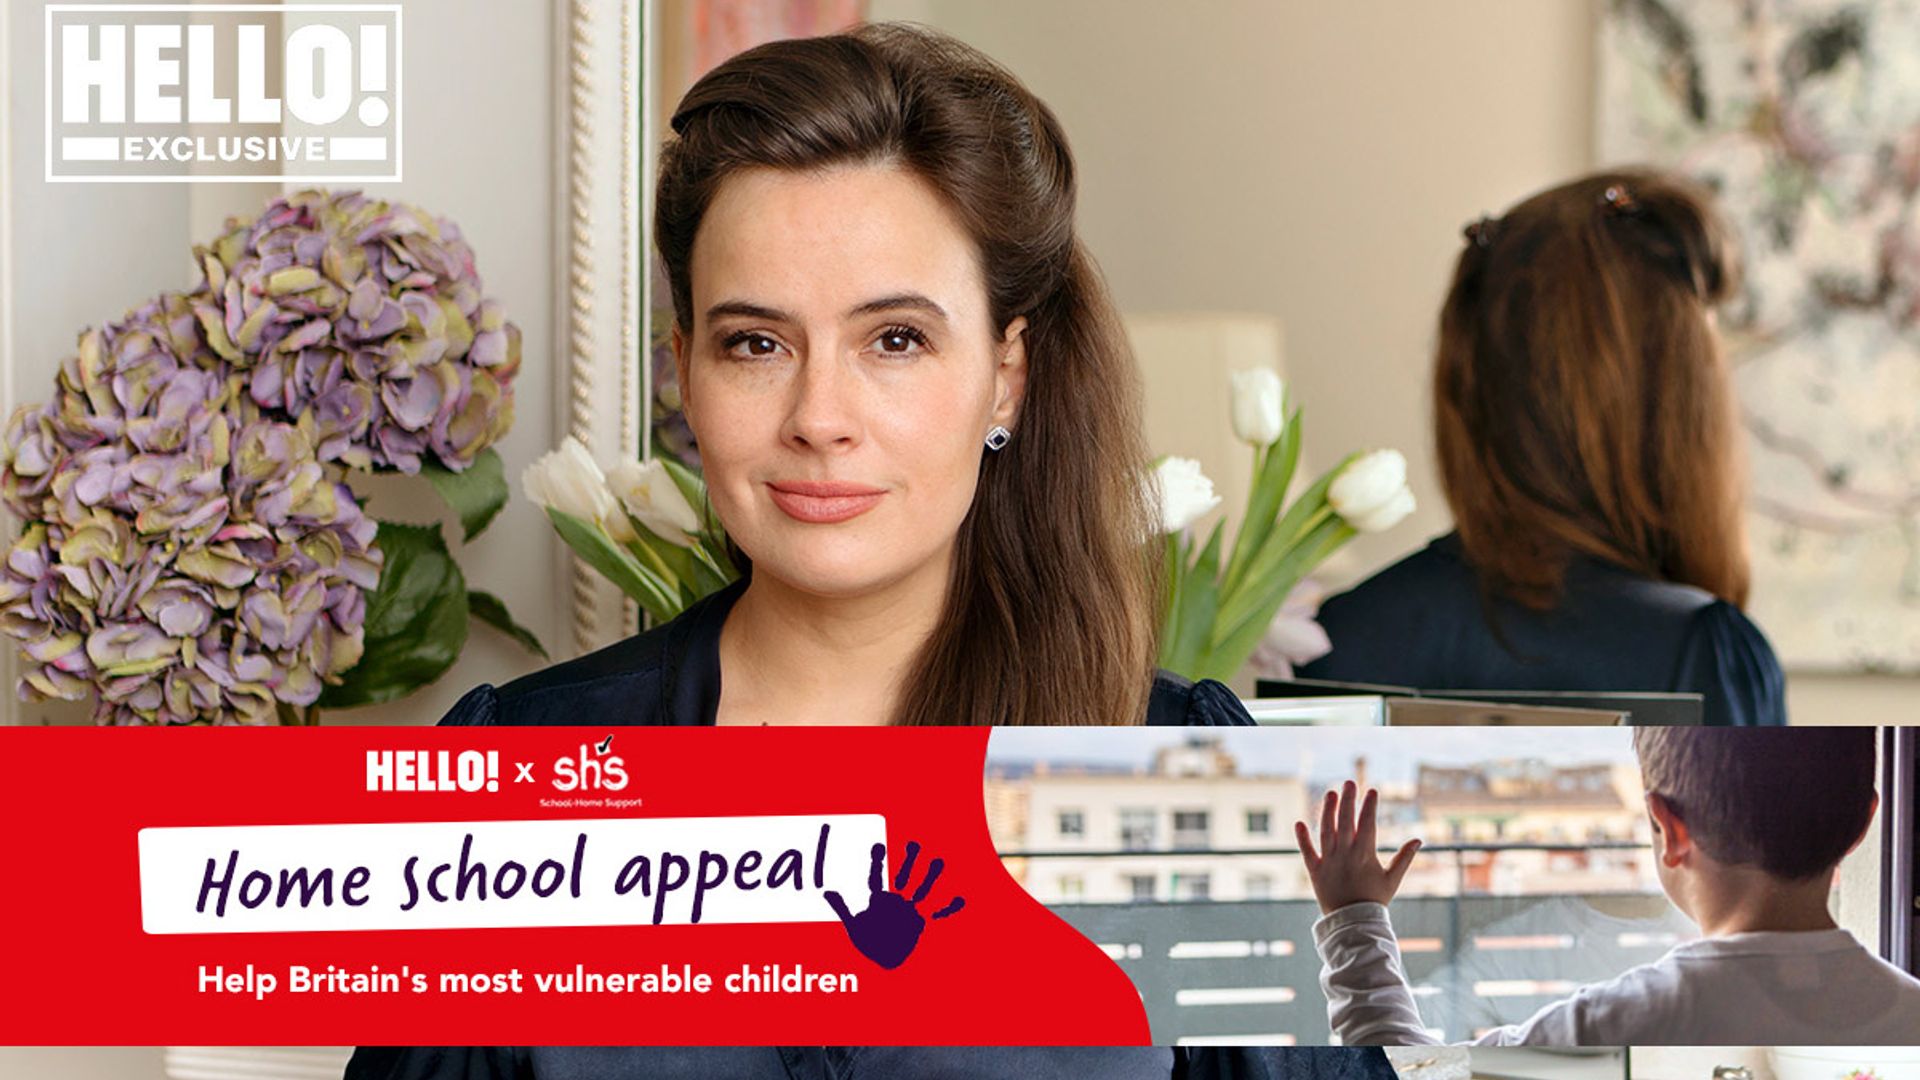 Lady Frederick Windsor launches appeal to help Britain's most vulnerable children and families